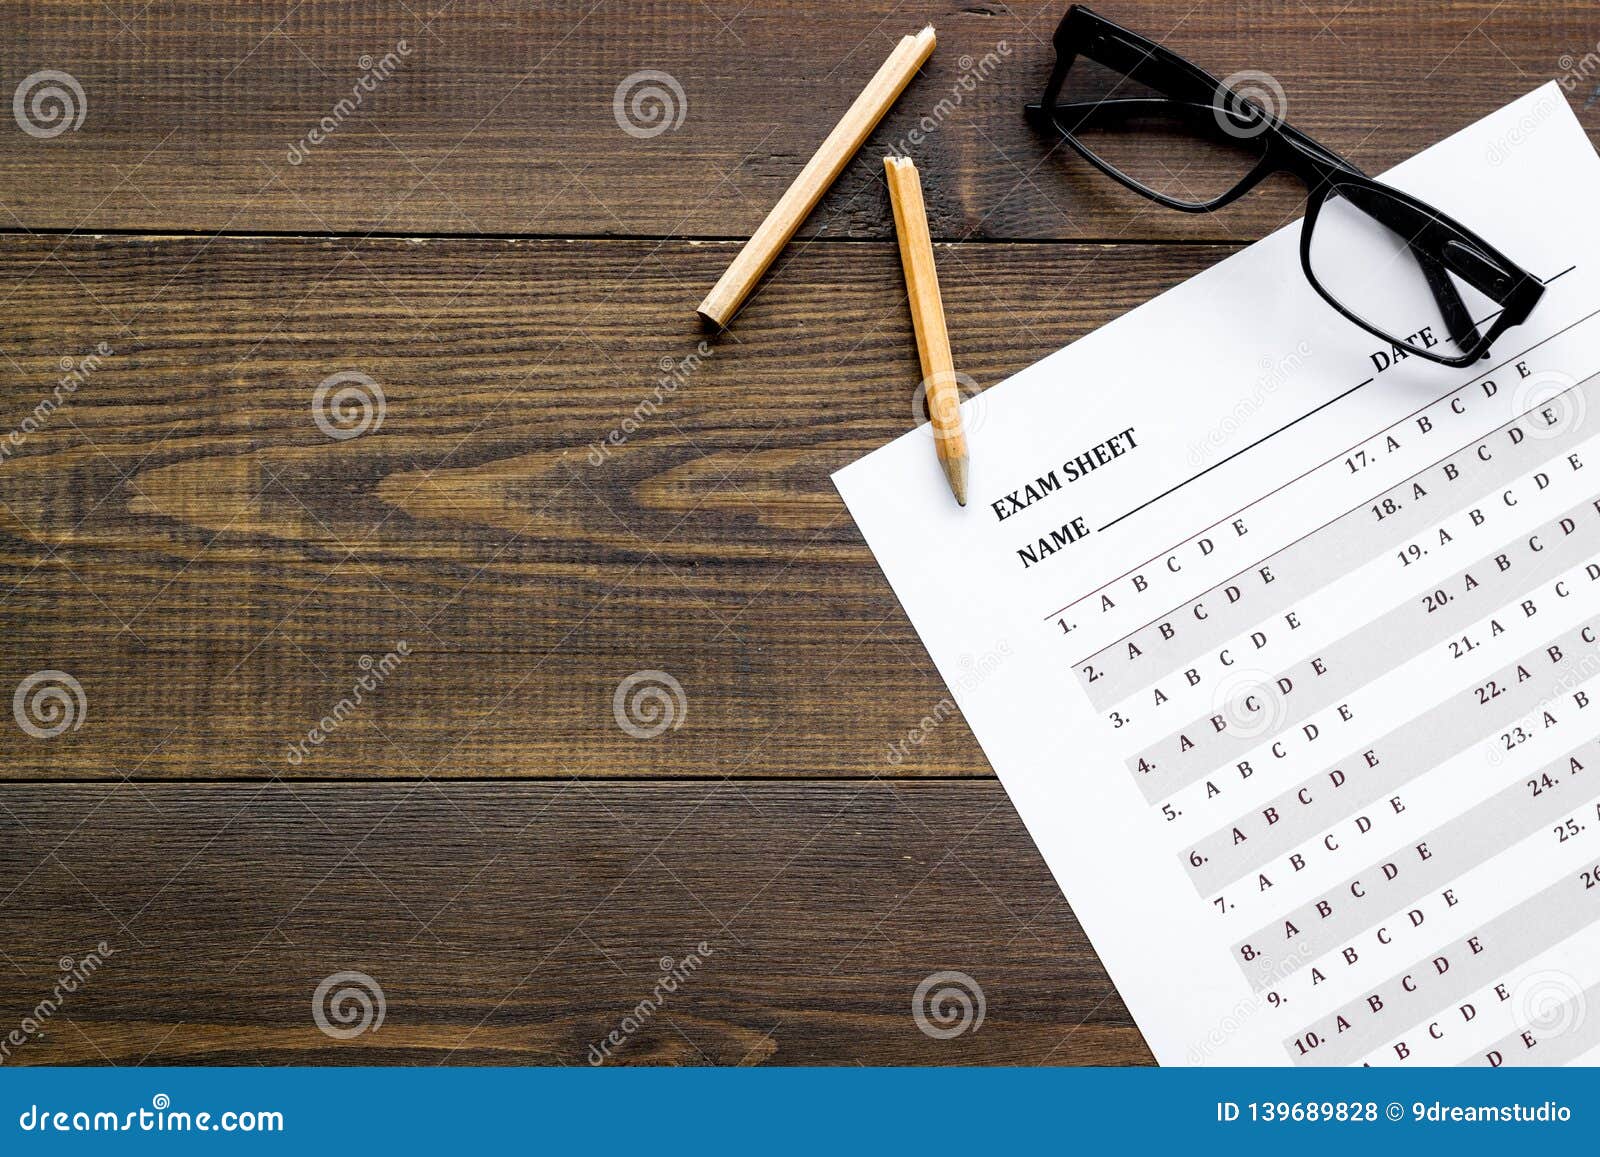 On The Exam Exam Sheet Answer Near Glasses And Pencil On Dark